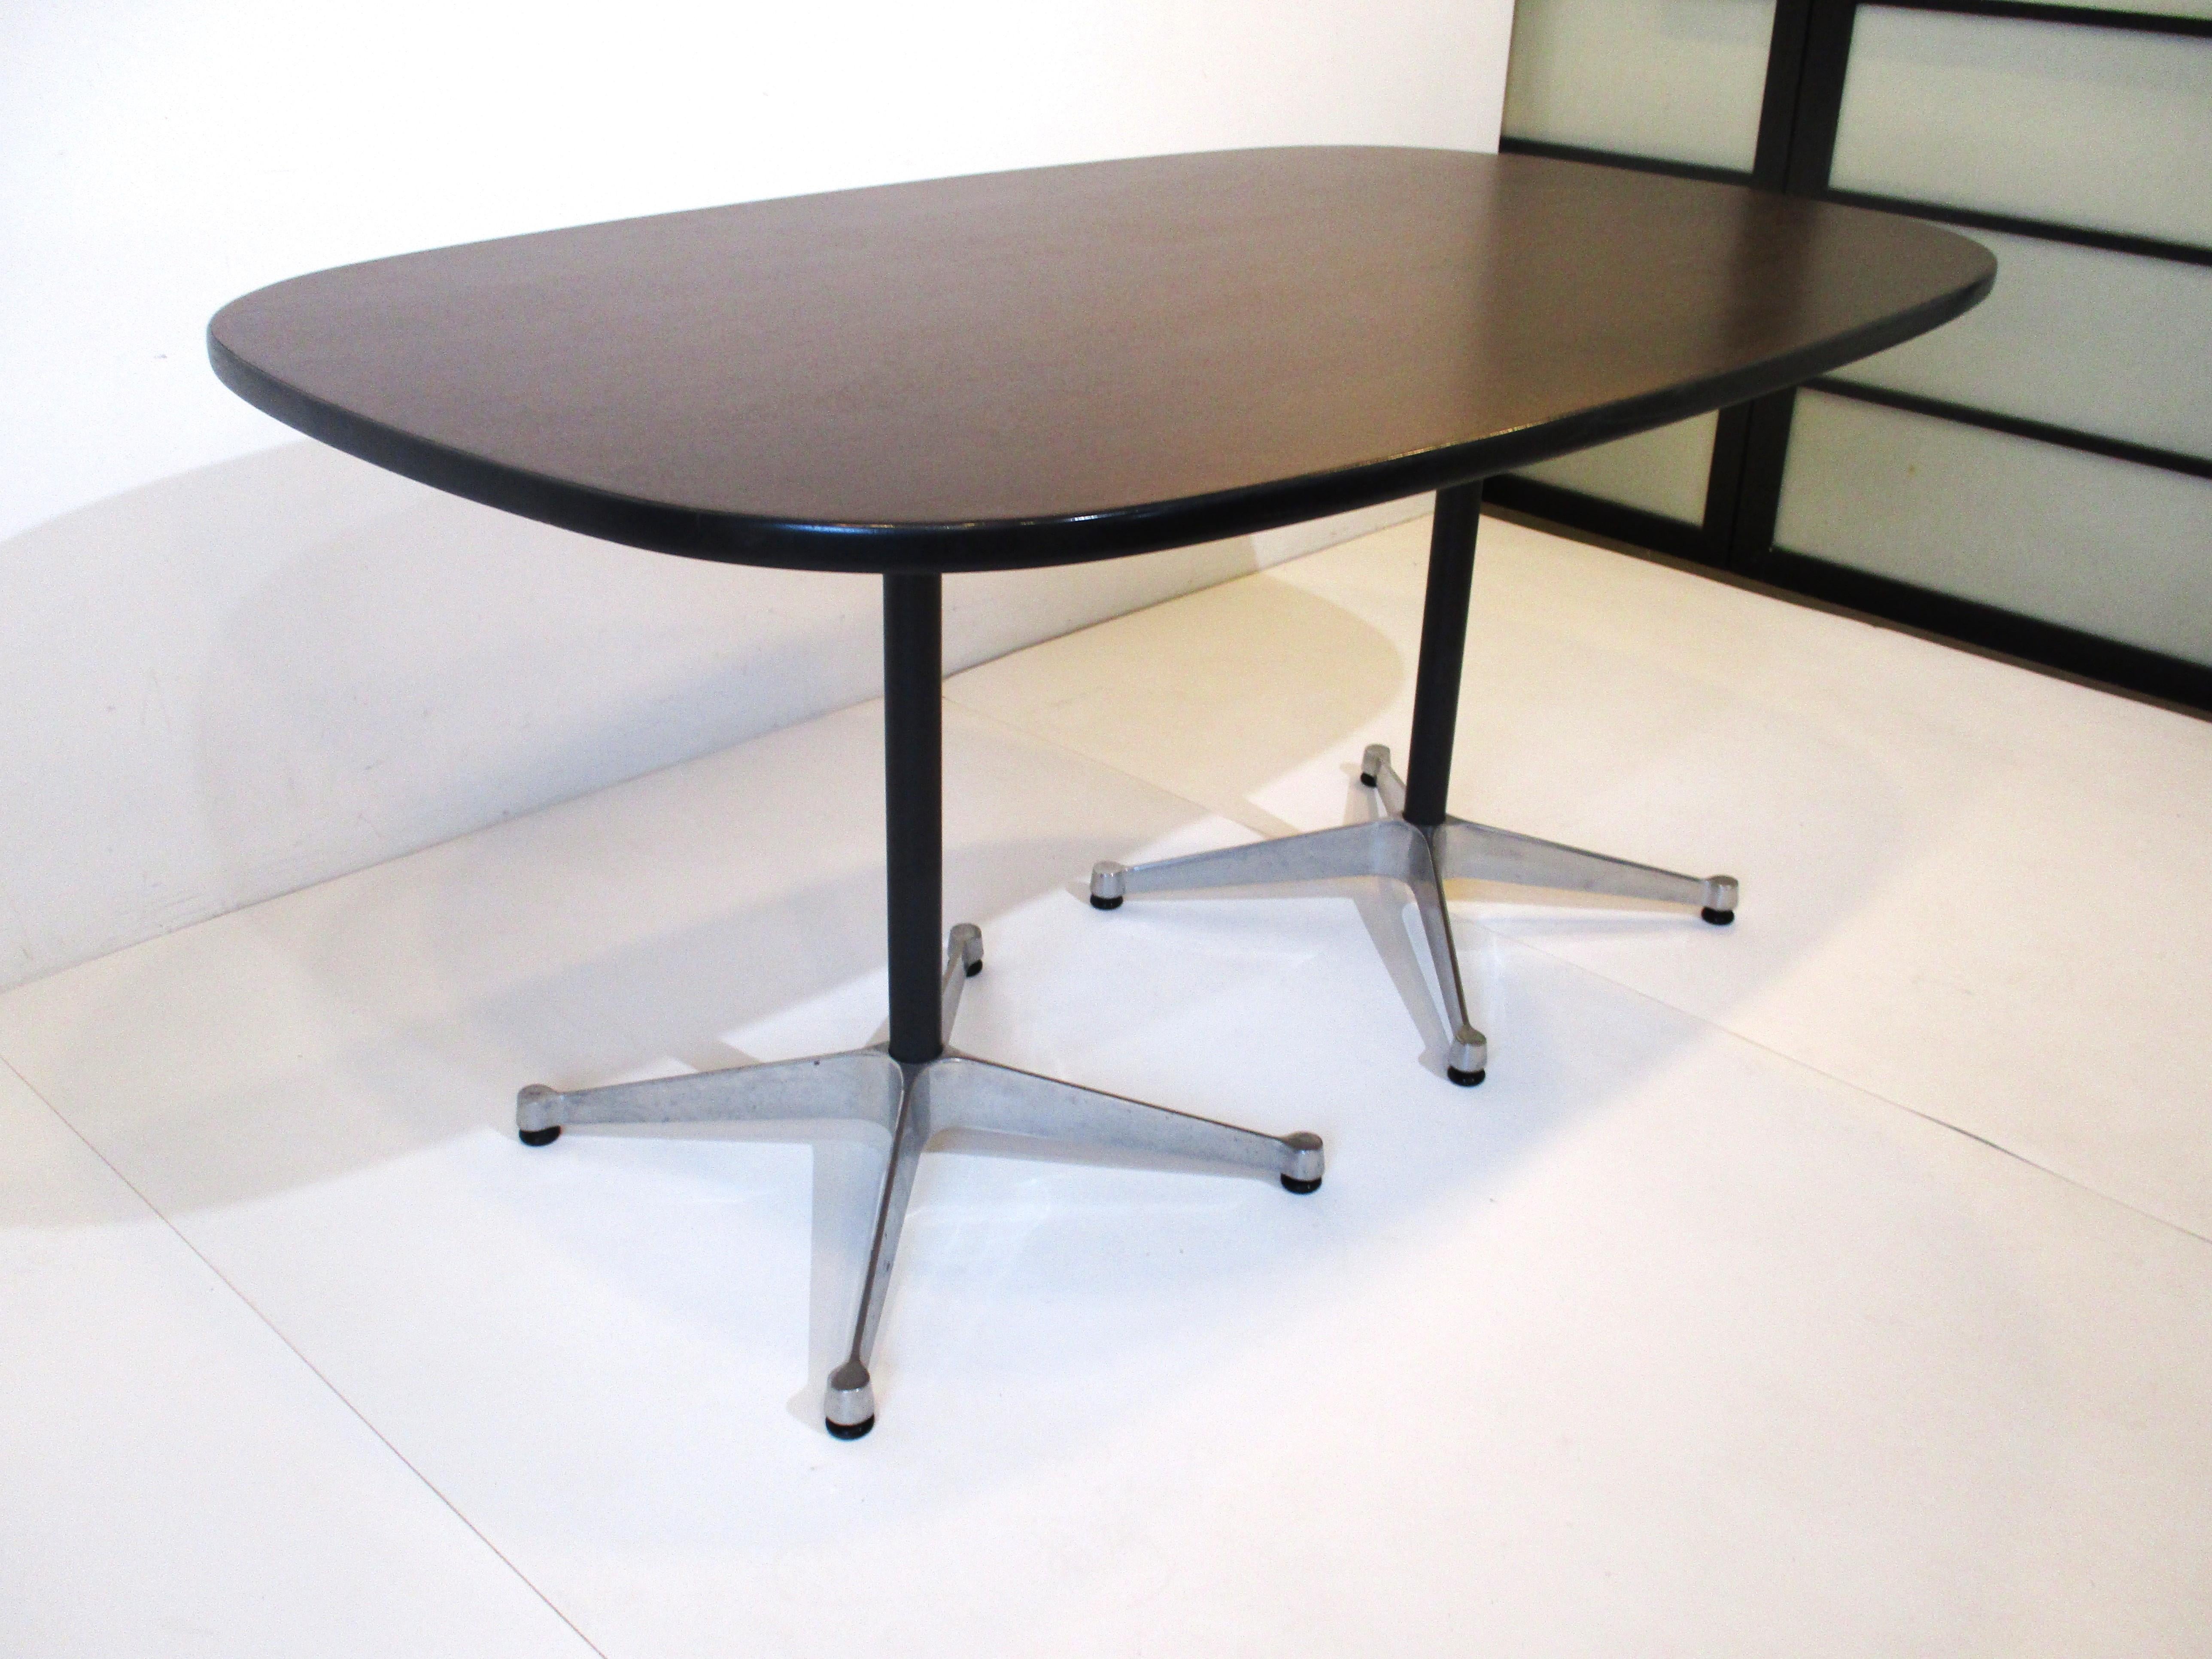 A smaller scale dark walnut topped dining table or desk with black rubber edge and double pedestal star base . From the Aluminum Group collection by the Herman Miller furniture company the bases are cast aluminum with satin black metal poles.